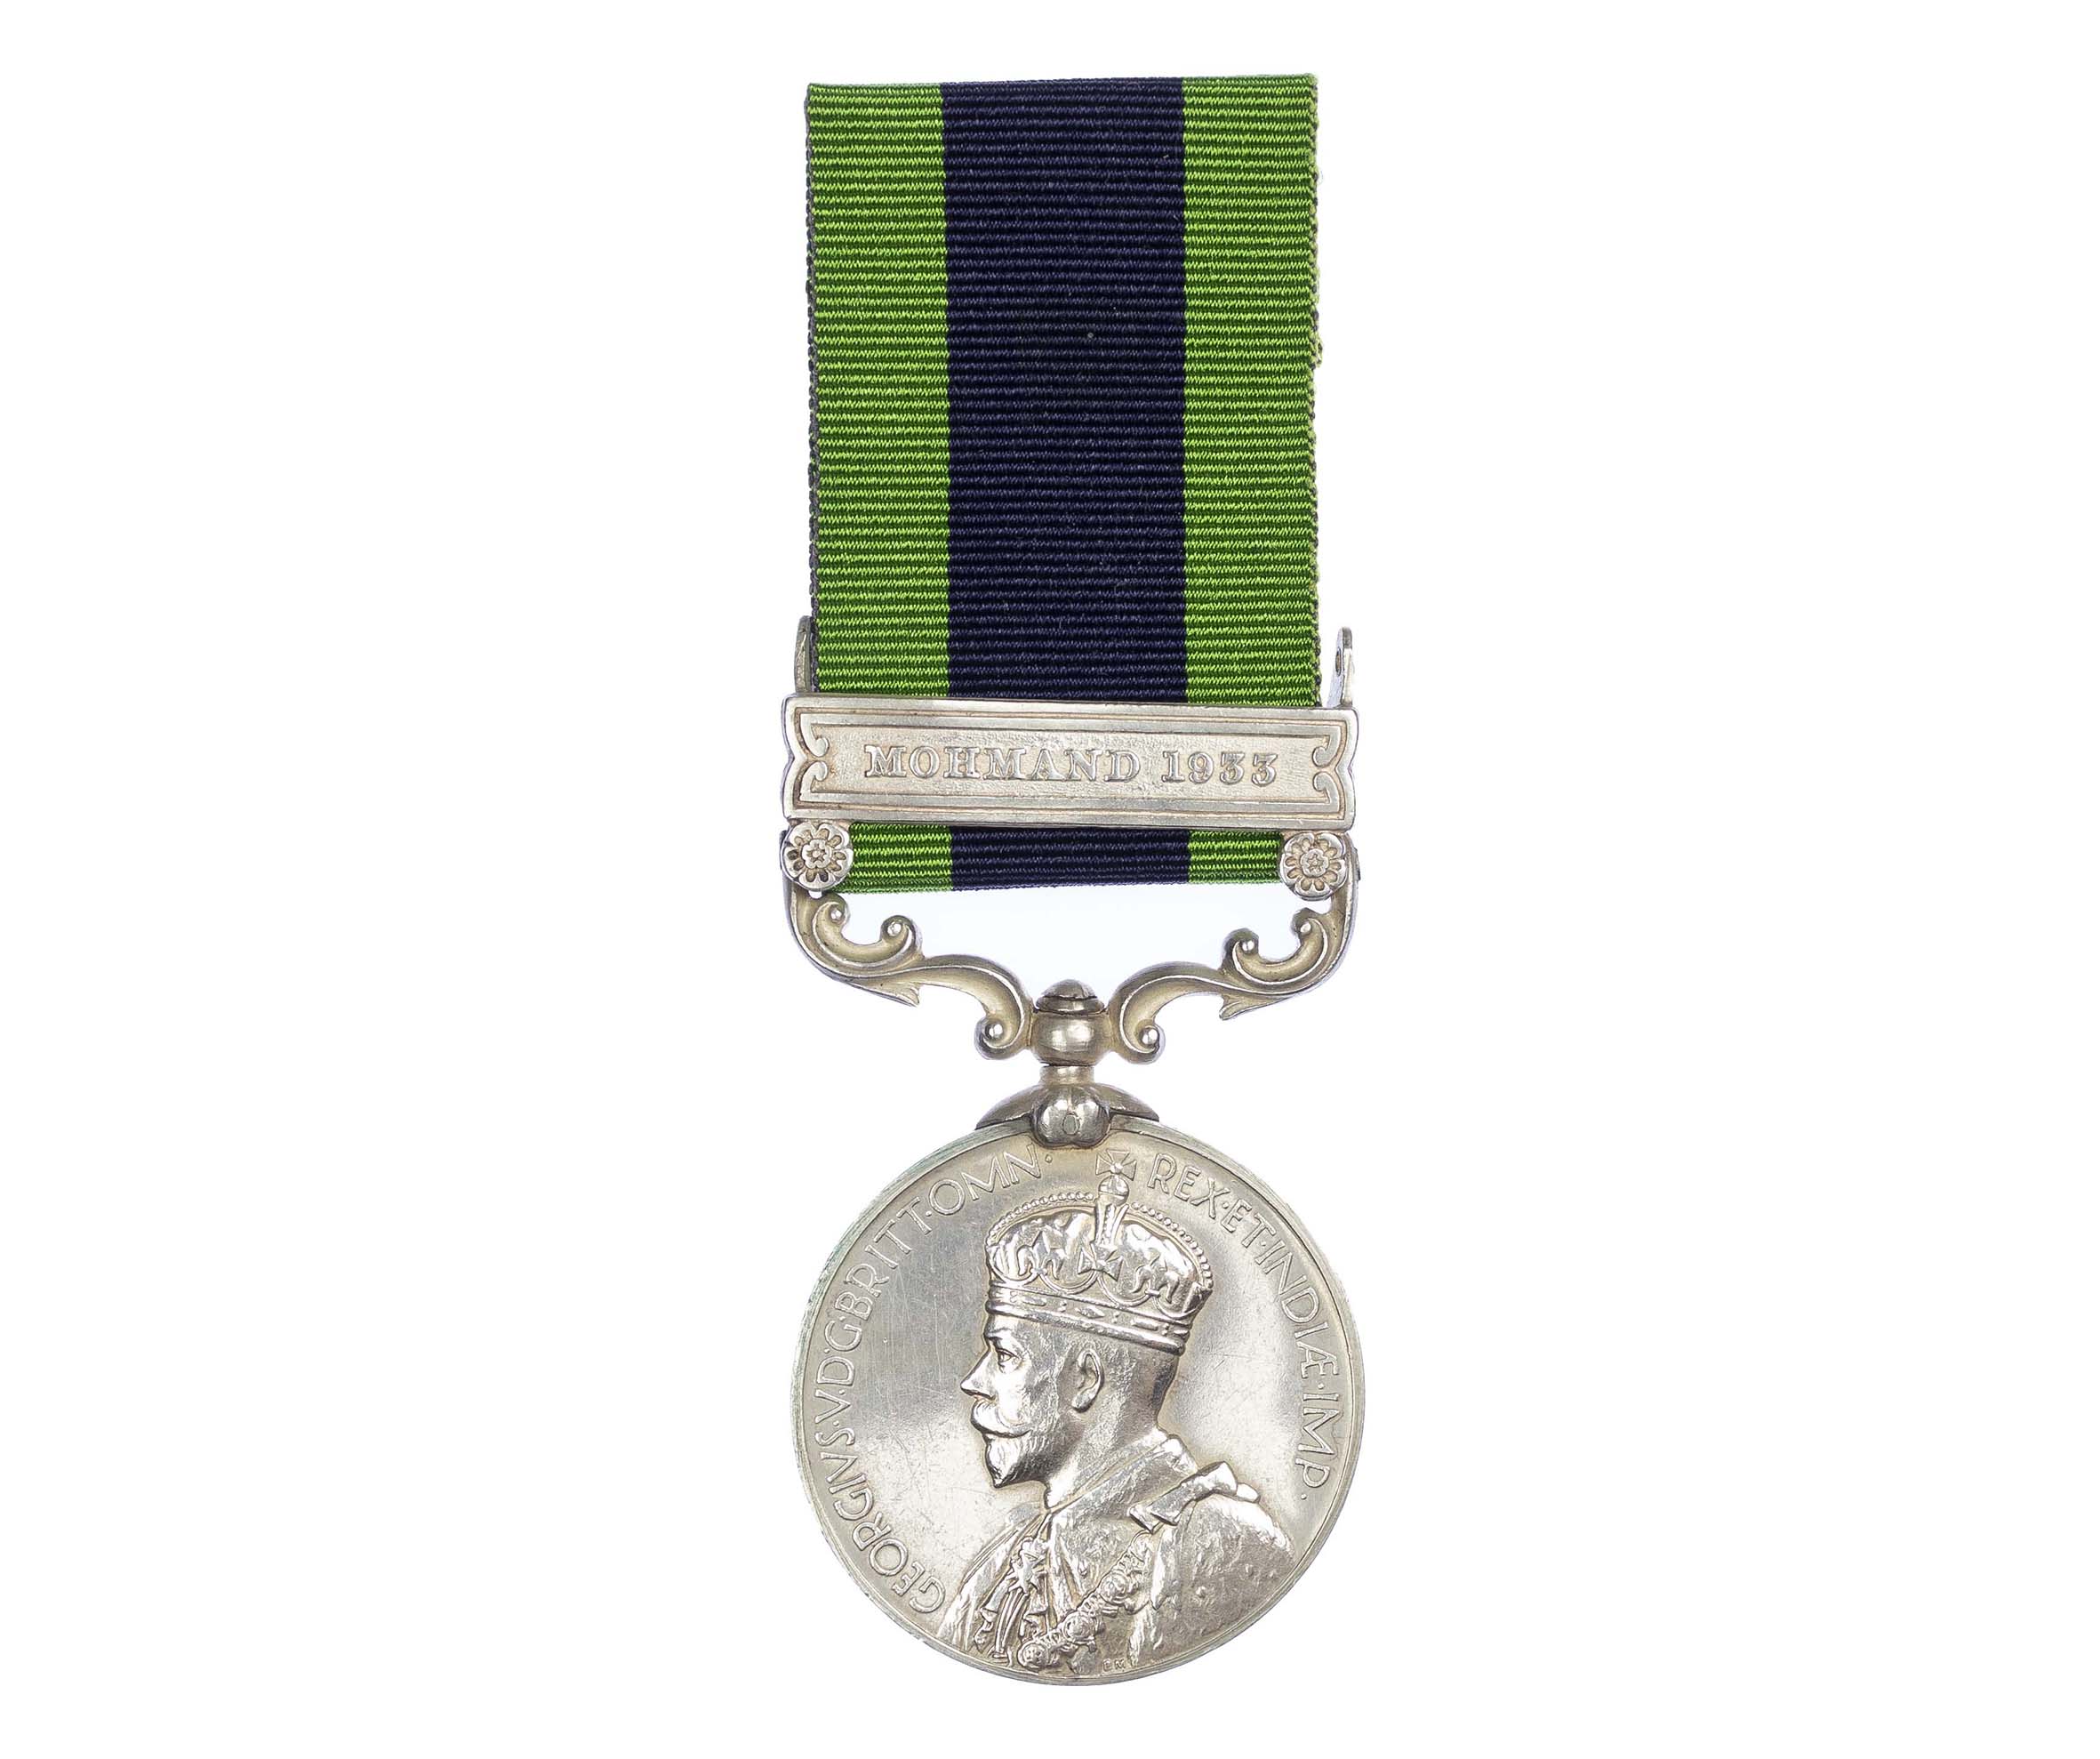 India General Service Medal 1908-1935, GVR, one clasp Mohamand 1933, to Syce Abdul Aziz